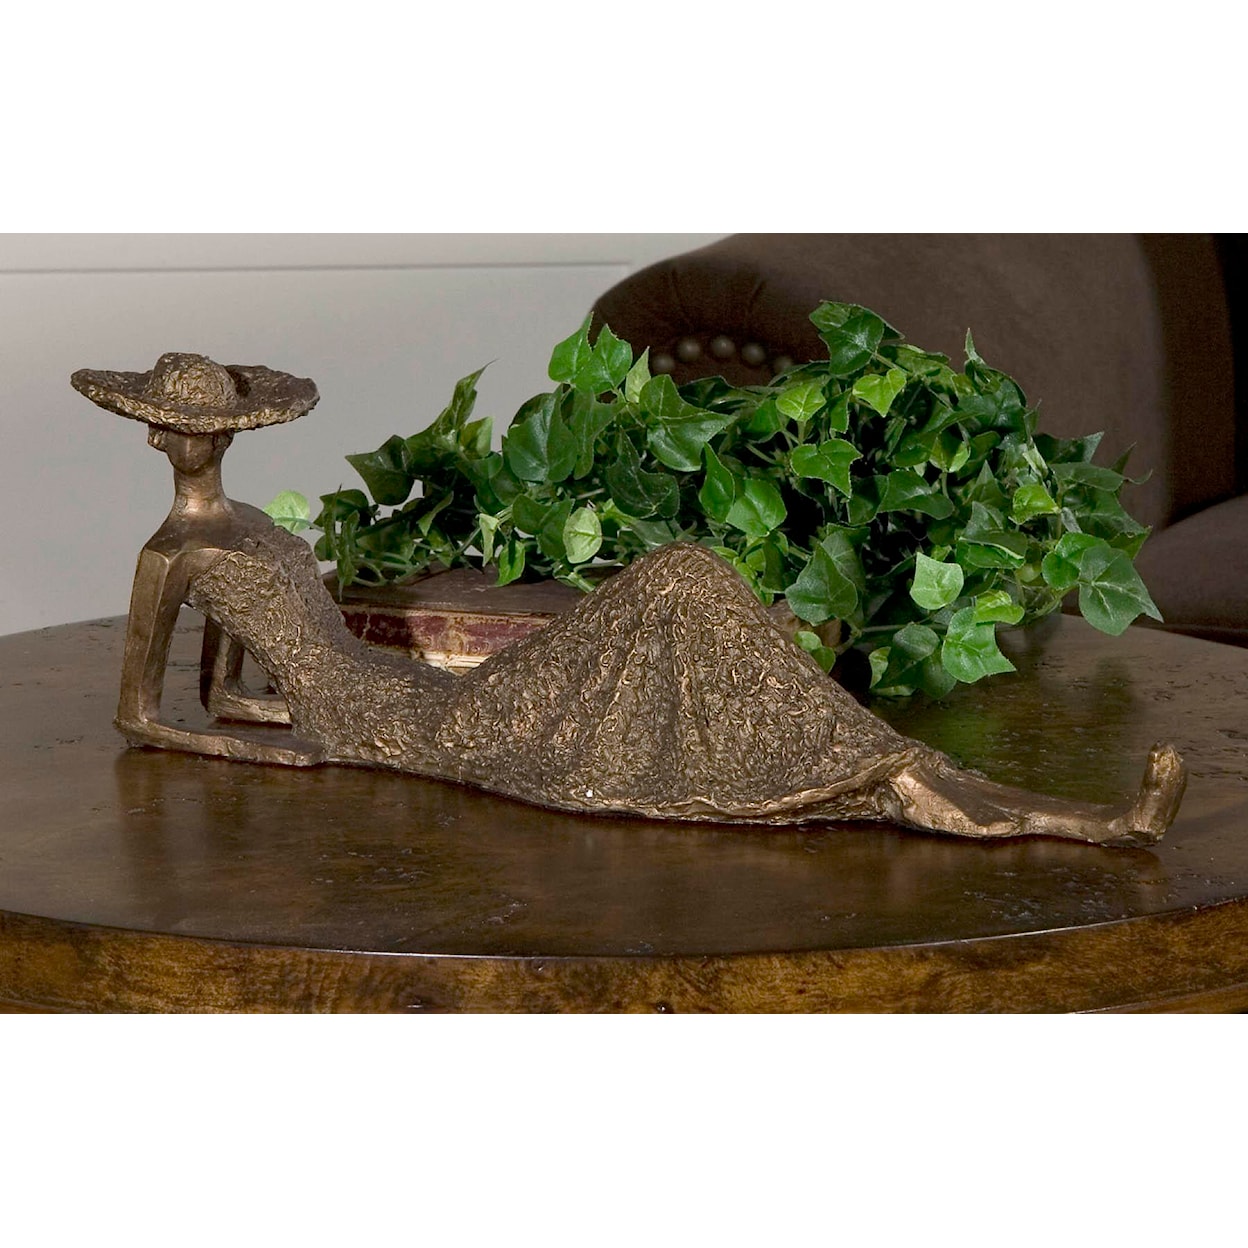 Uttermost Accessories - Statues and Figurines Summer Days Sculpture